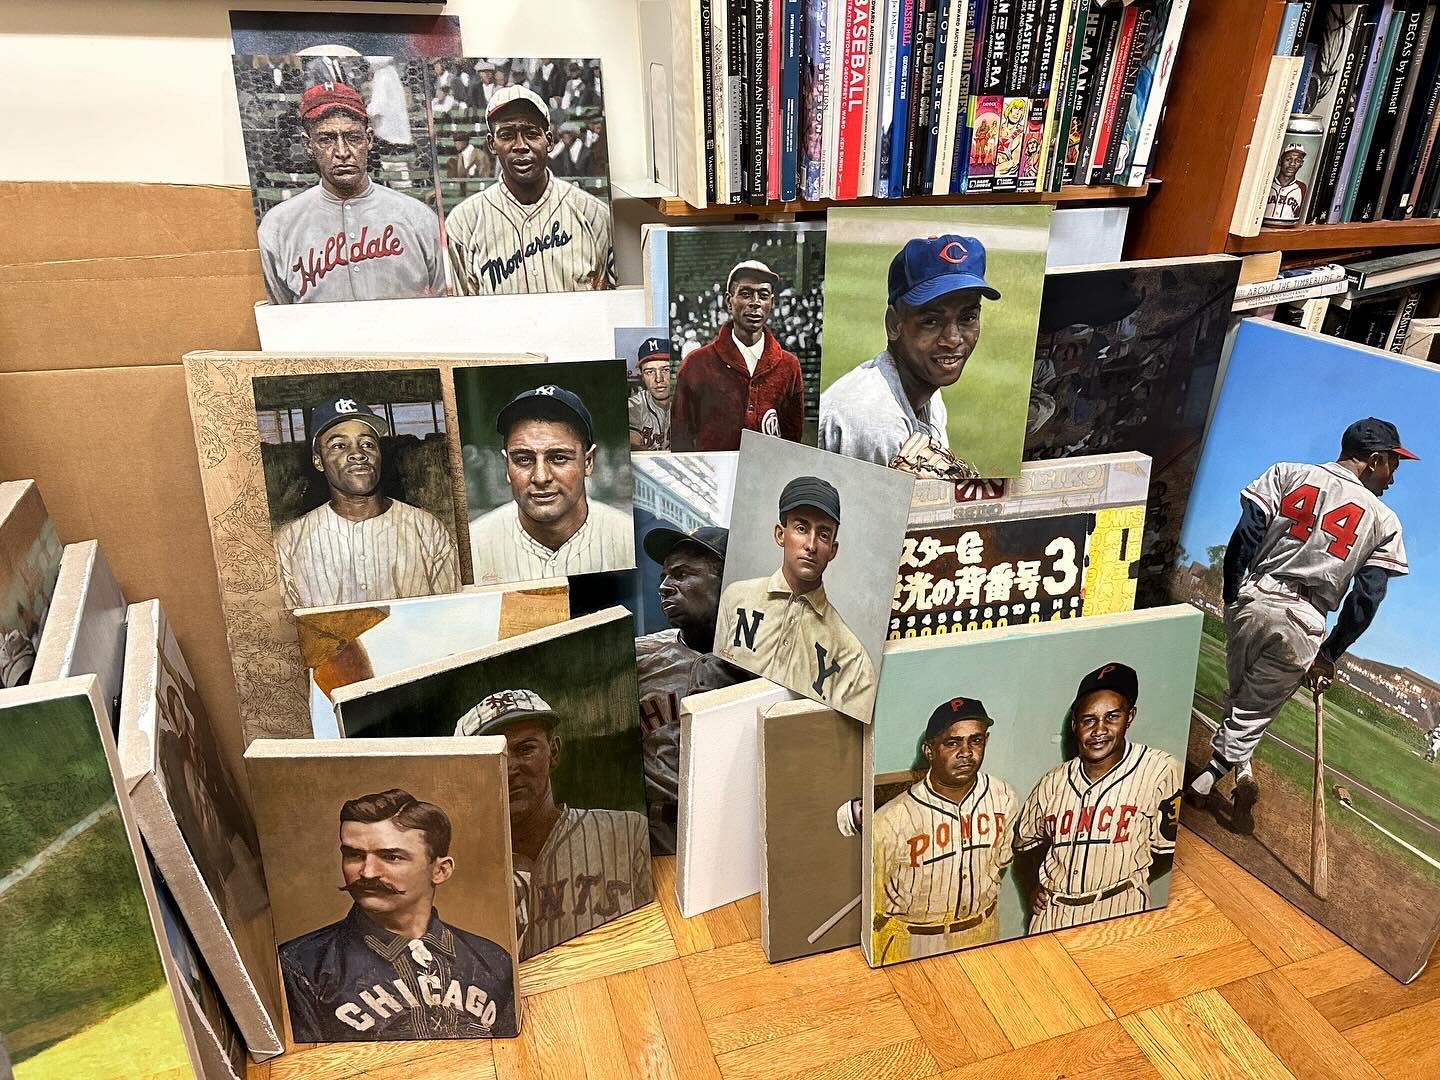 A lot of paintings staring at me, waiting to get finished. Sigh.

#baseballart